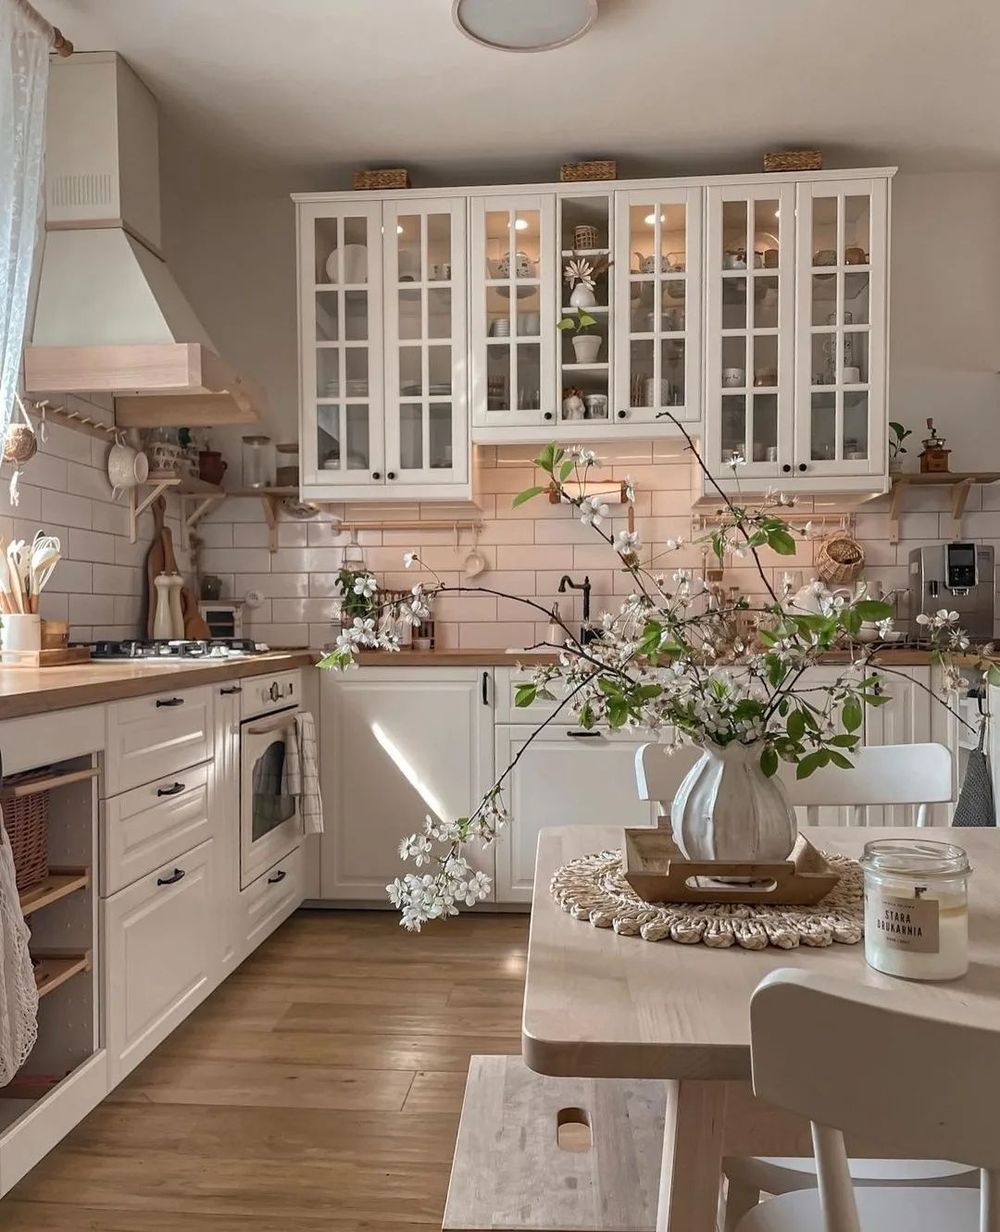 Country kitchen cottage style @joannacosyhome